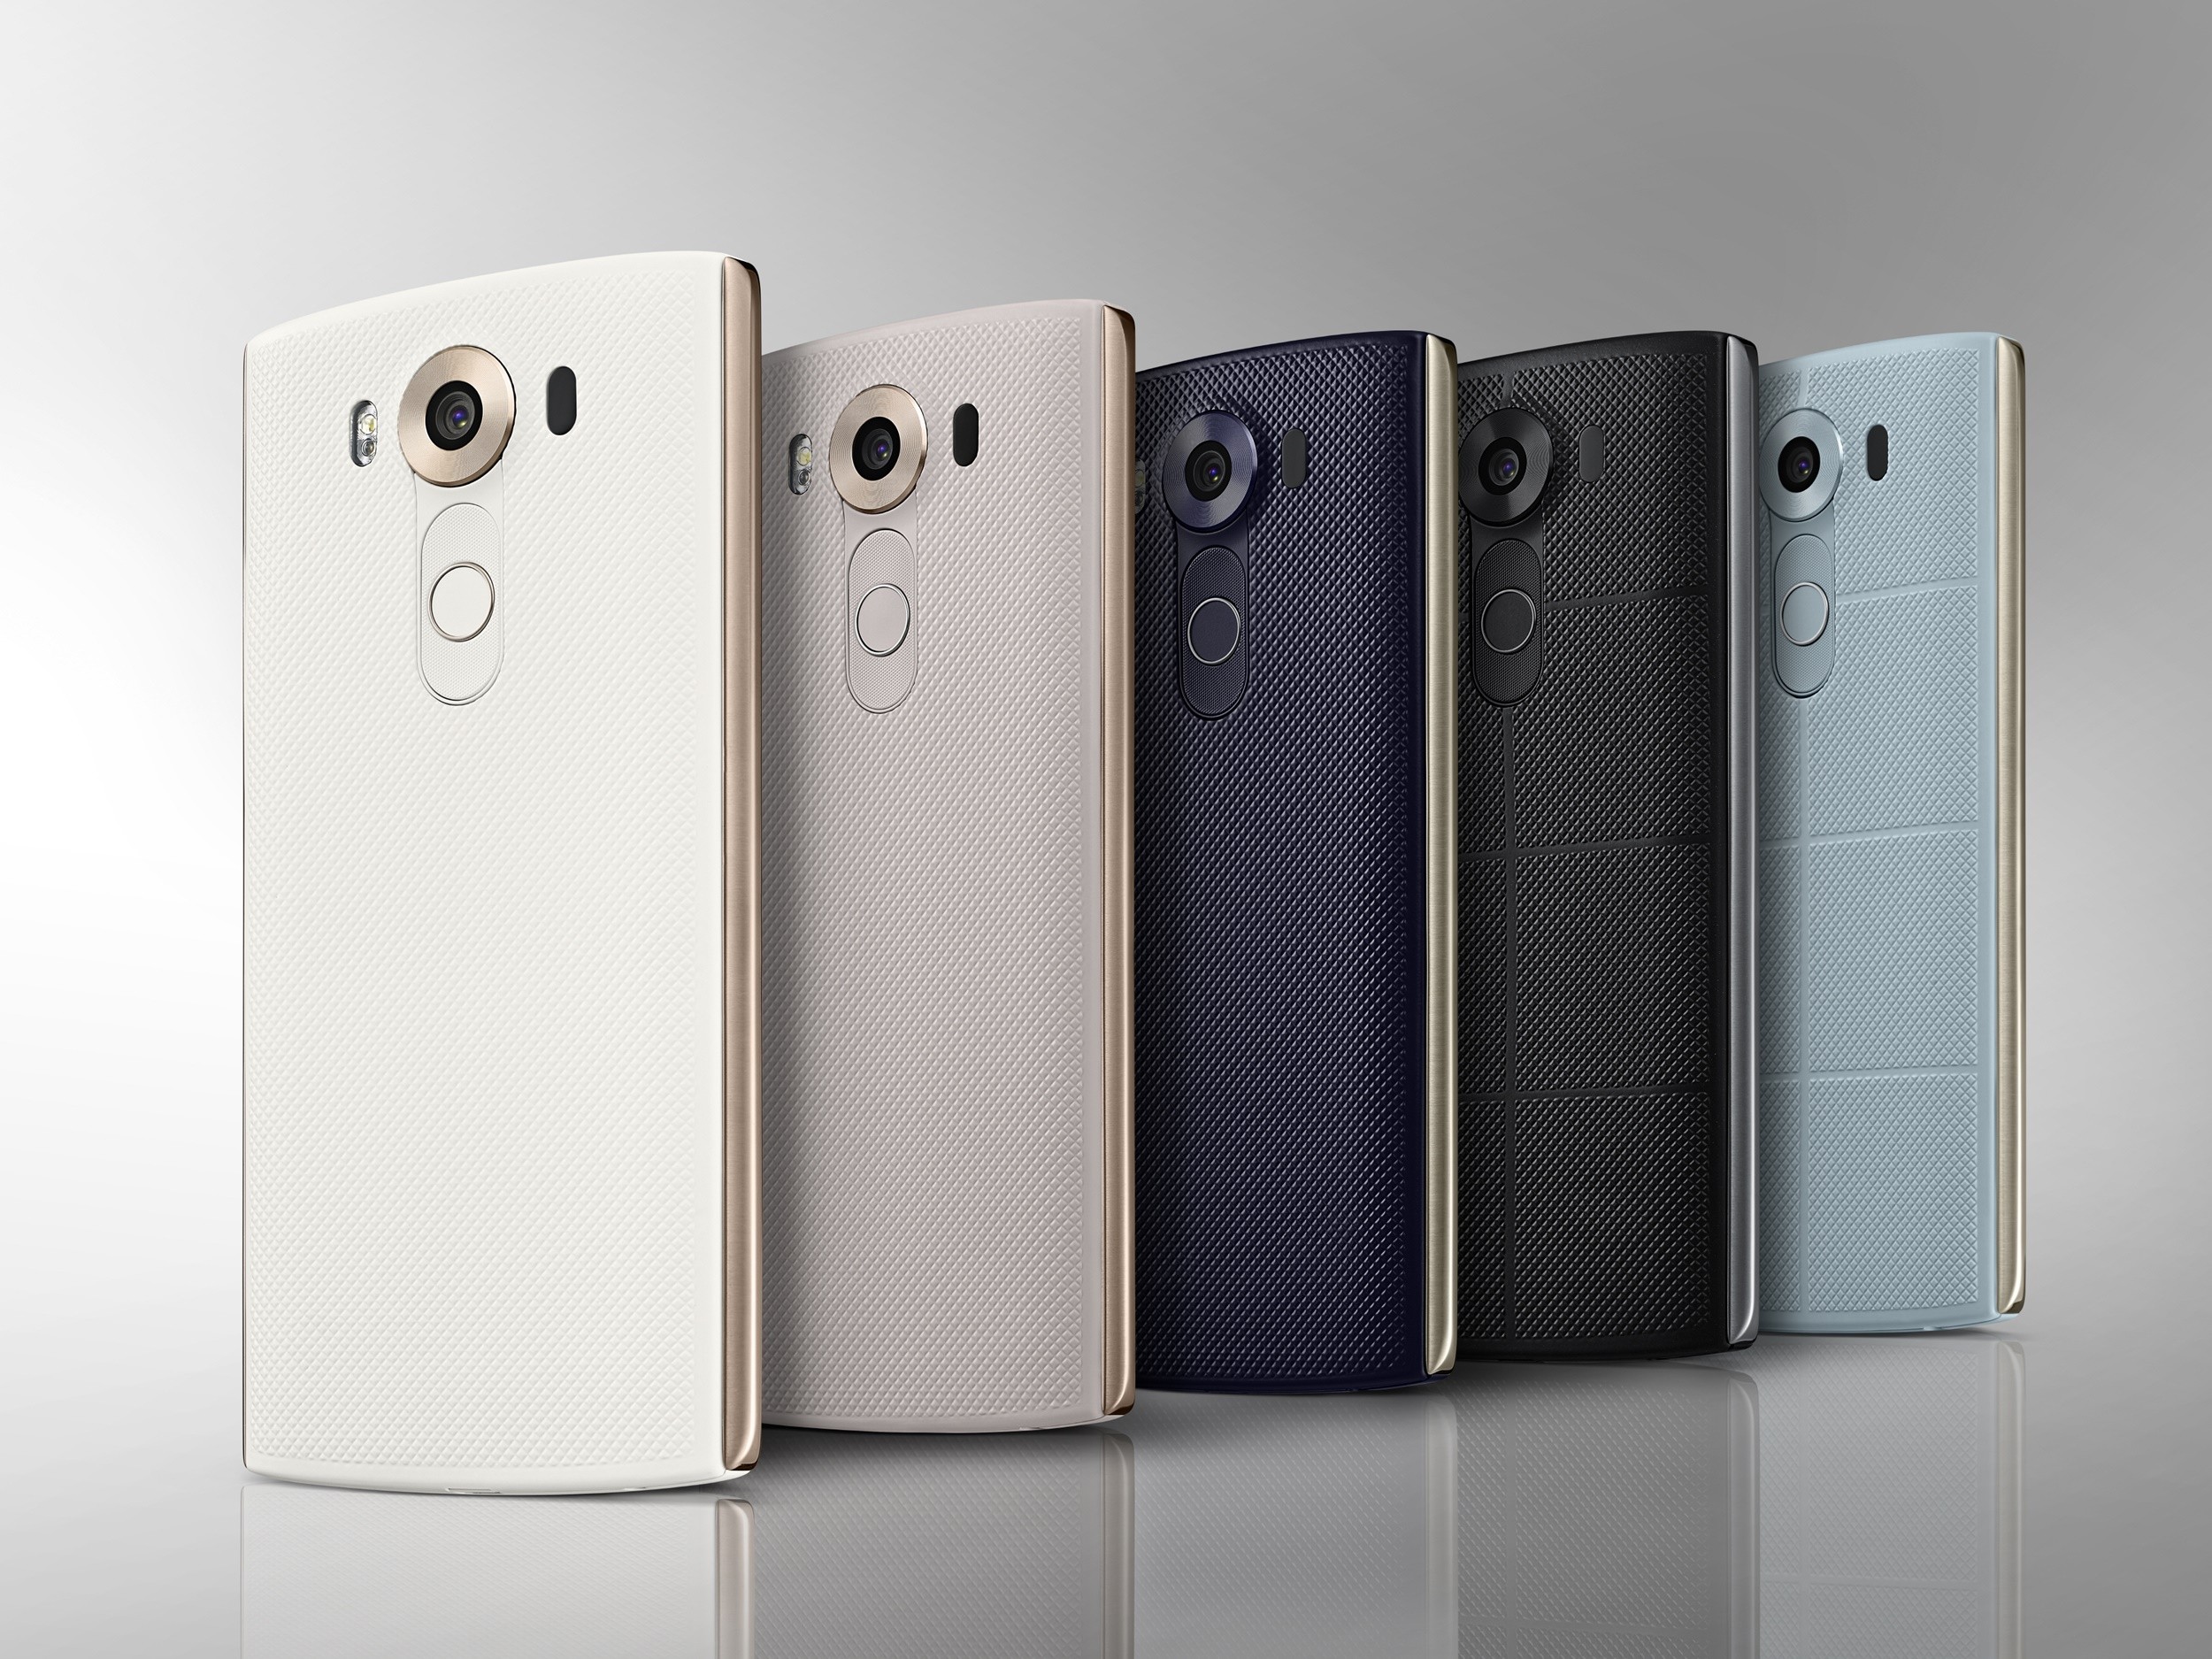 LG UNVEILS V10, A SMARTPHONE DESIGNED WITH CREATIVITY IN MIND | LG Newsroom